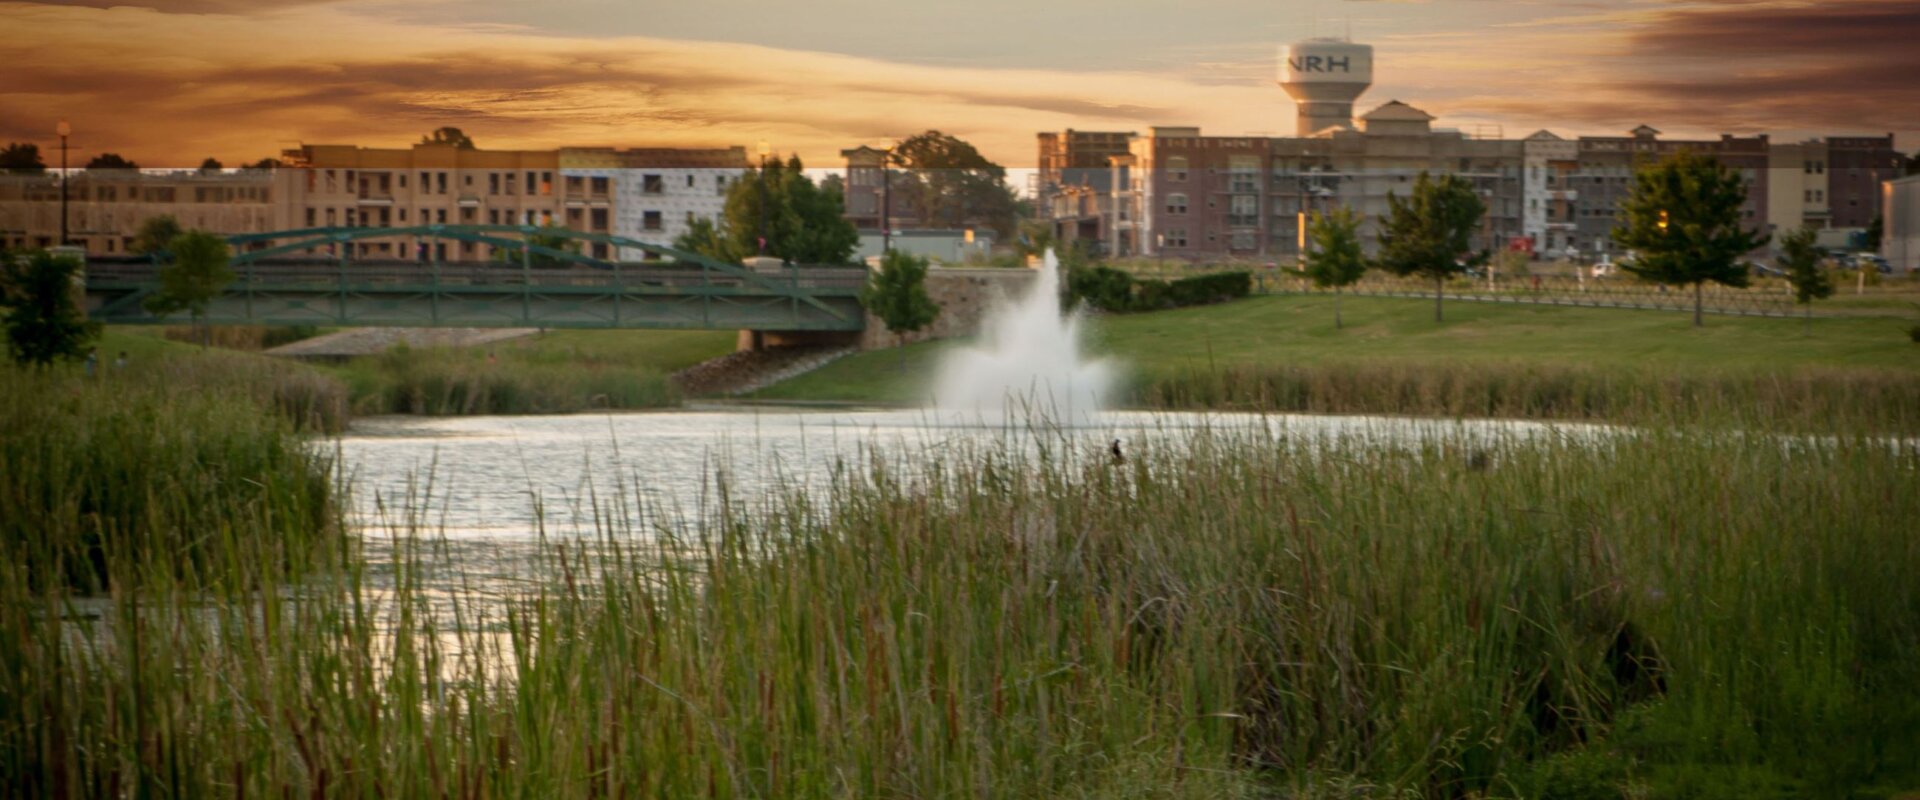 North Richland Hills photo with sunset and fountain in lake with city offices and water tower in background